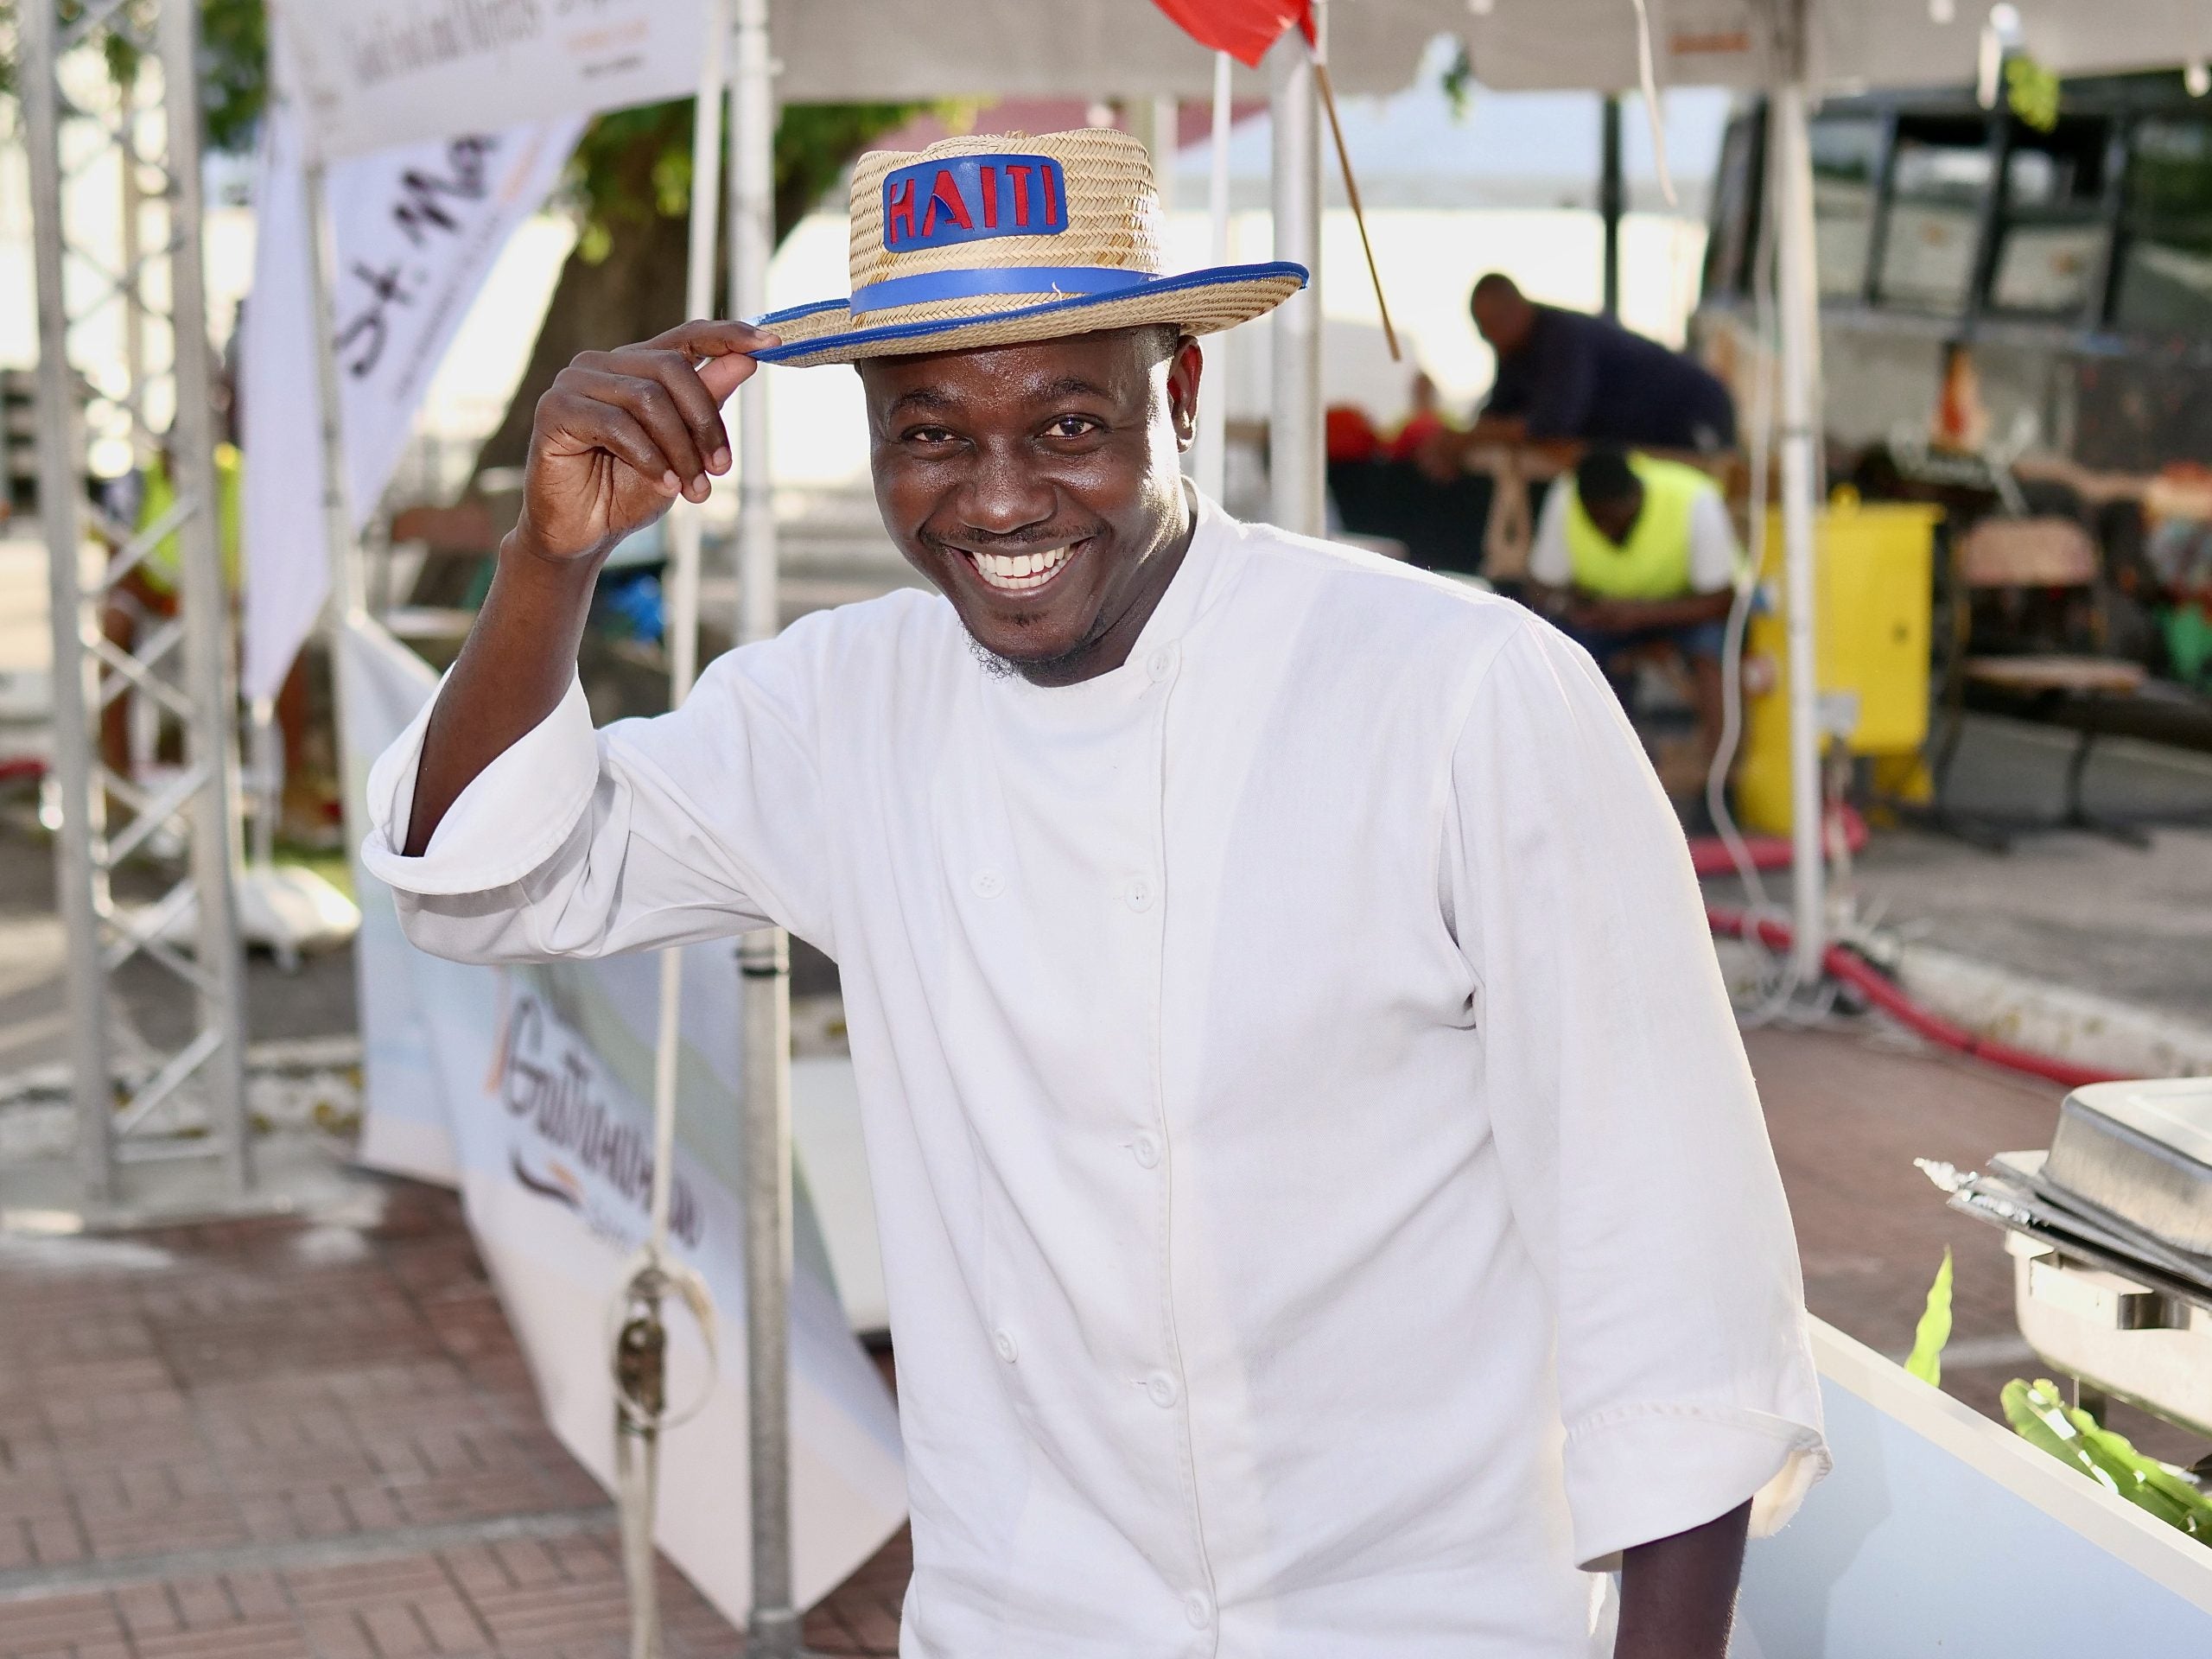 This Food Festival Is Taking Over The Caribbean.  Meet The Black Chefs Showcasing Their Skills And Connecting Communities